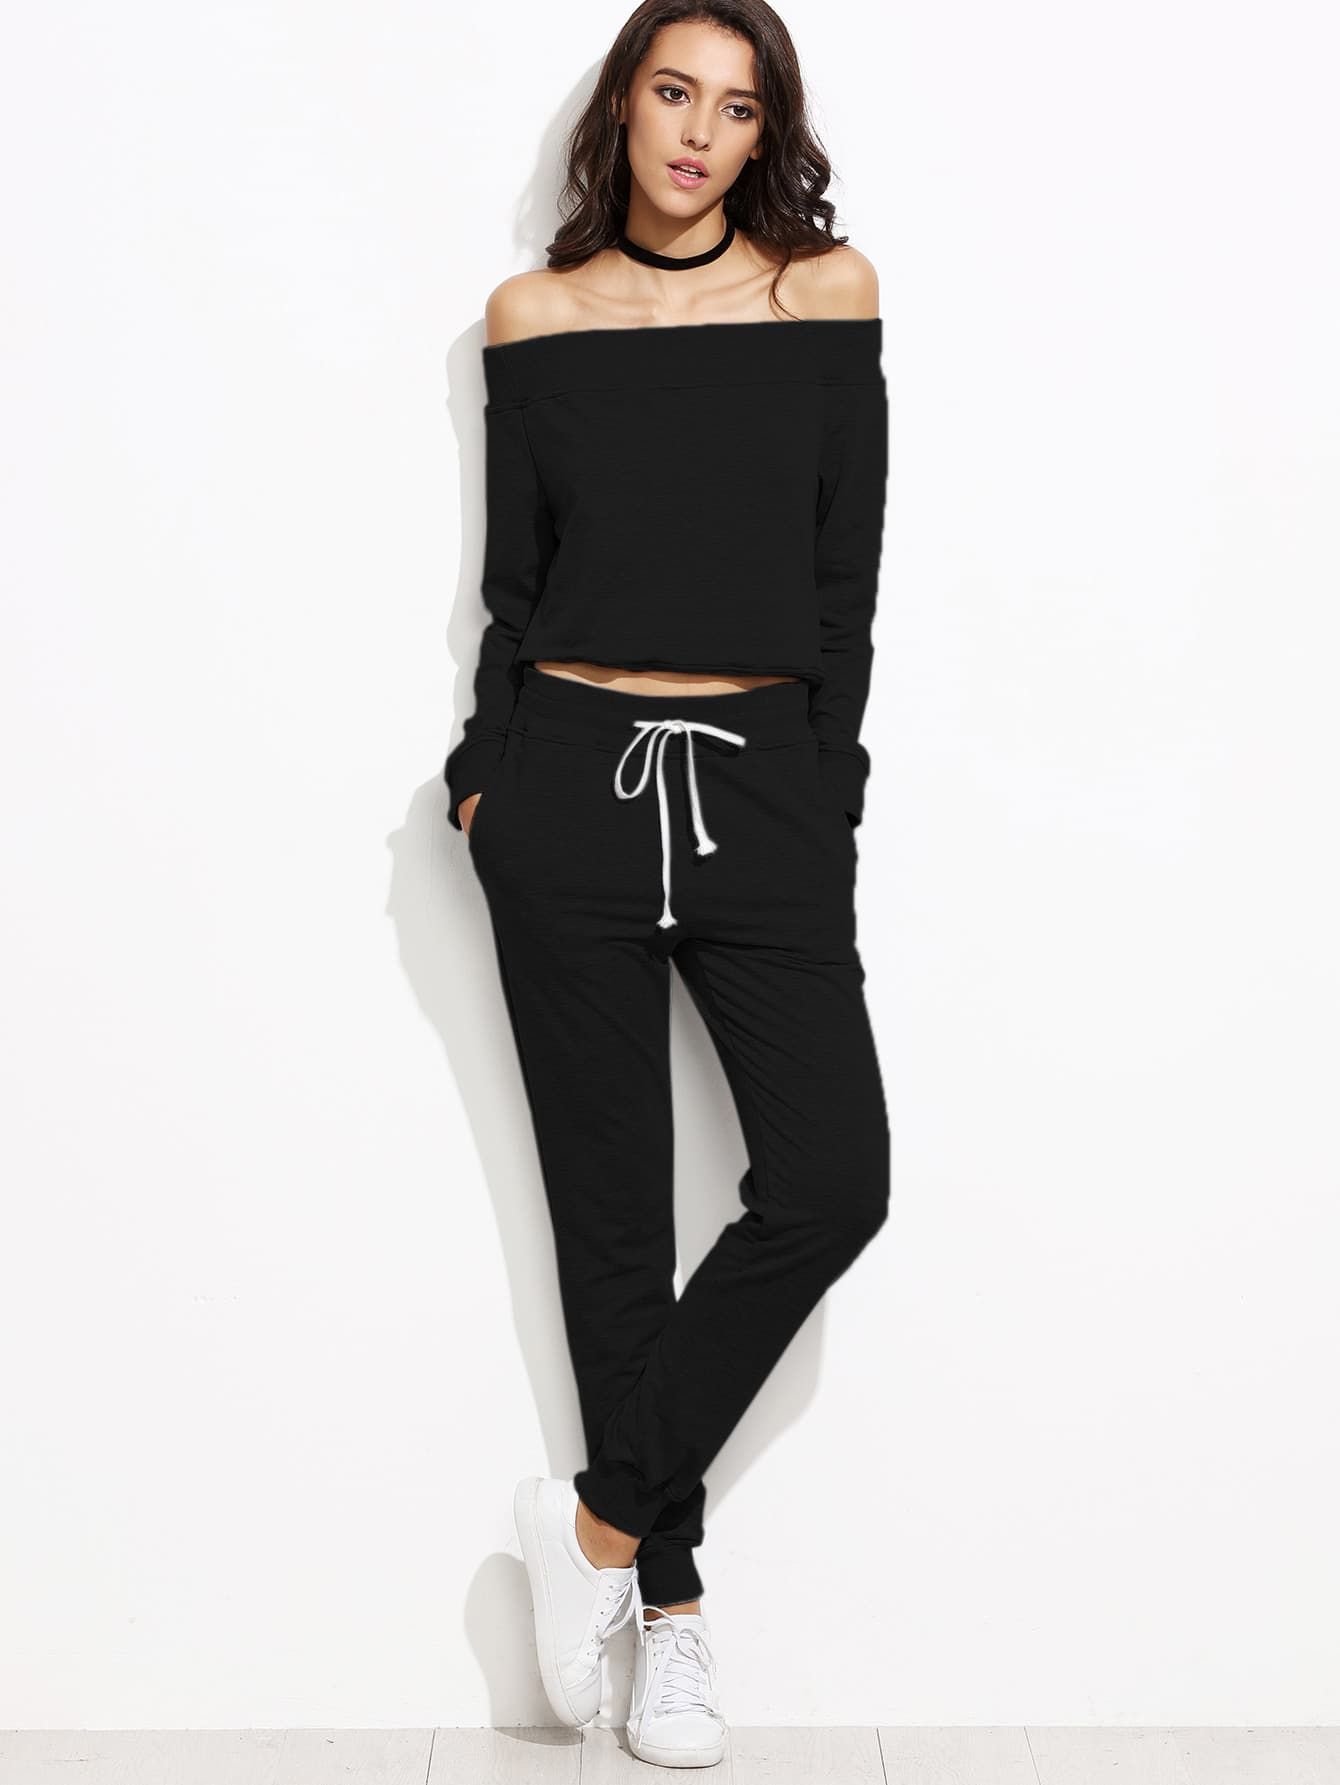 Black Off The Shoulder Top With Drawstring Pants | Romwe